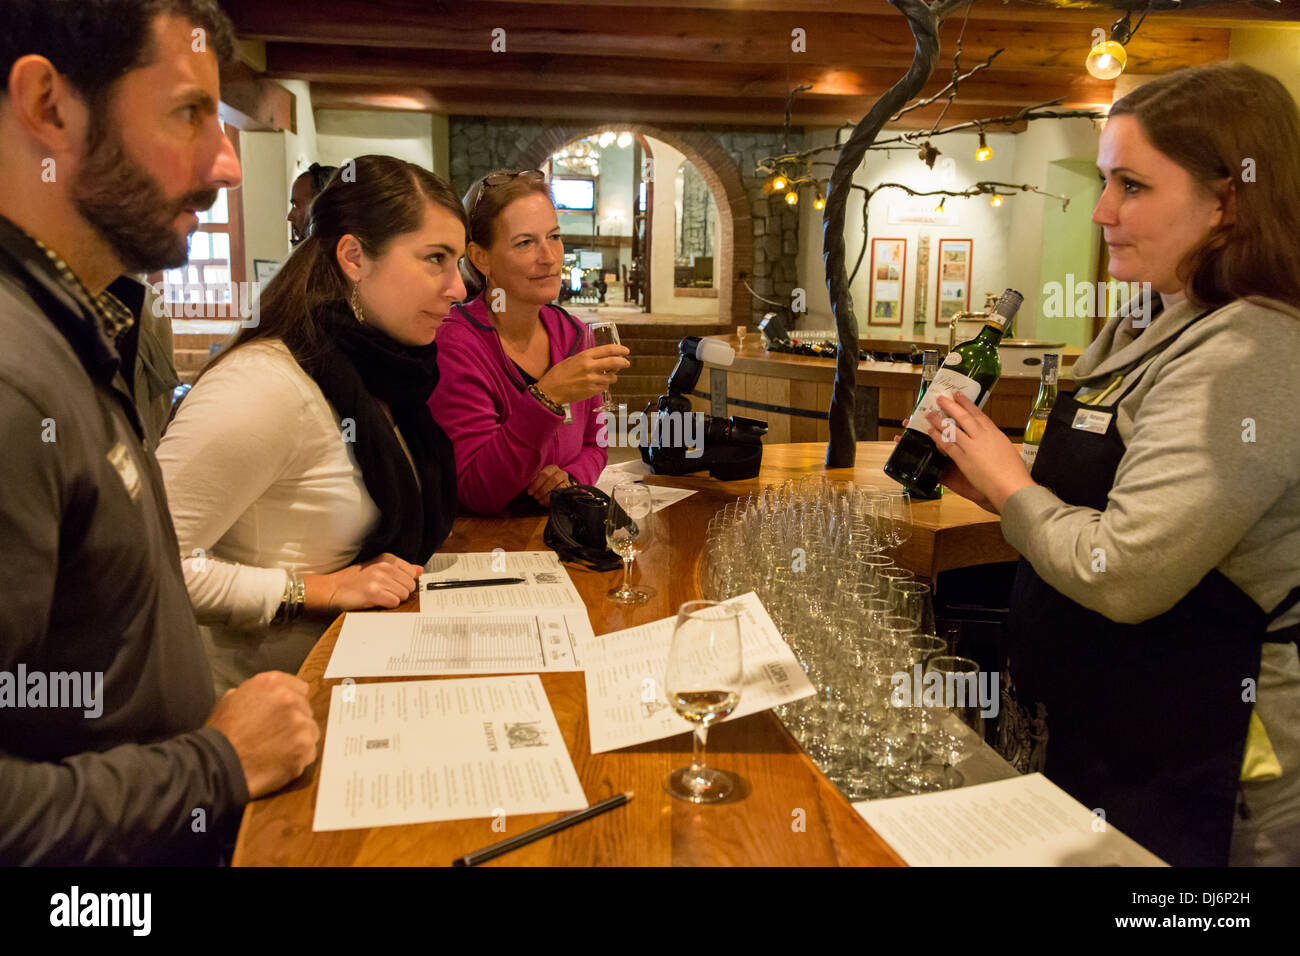 South Africa, Paarl area, near Cape Town. Tourists enjoying a wine-tasting session at Fairview winery. Stock Photo